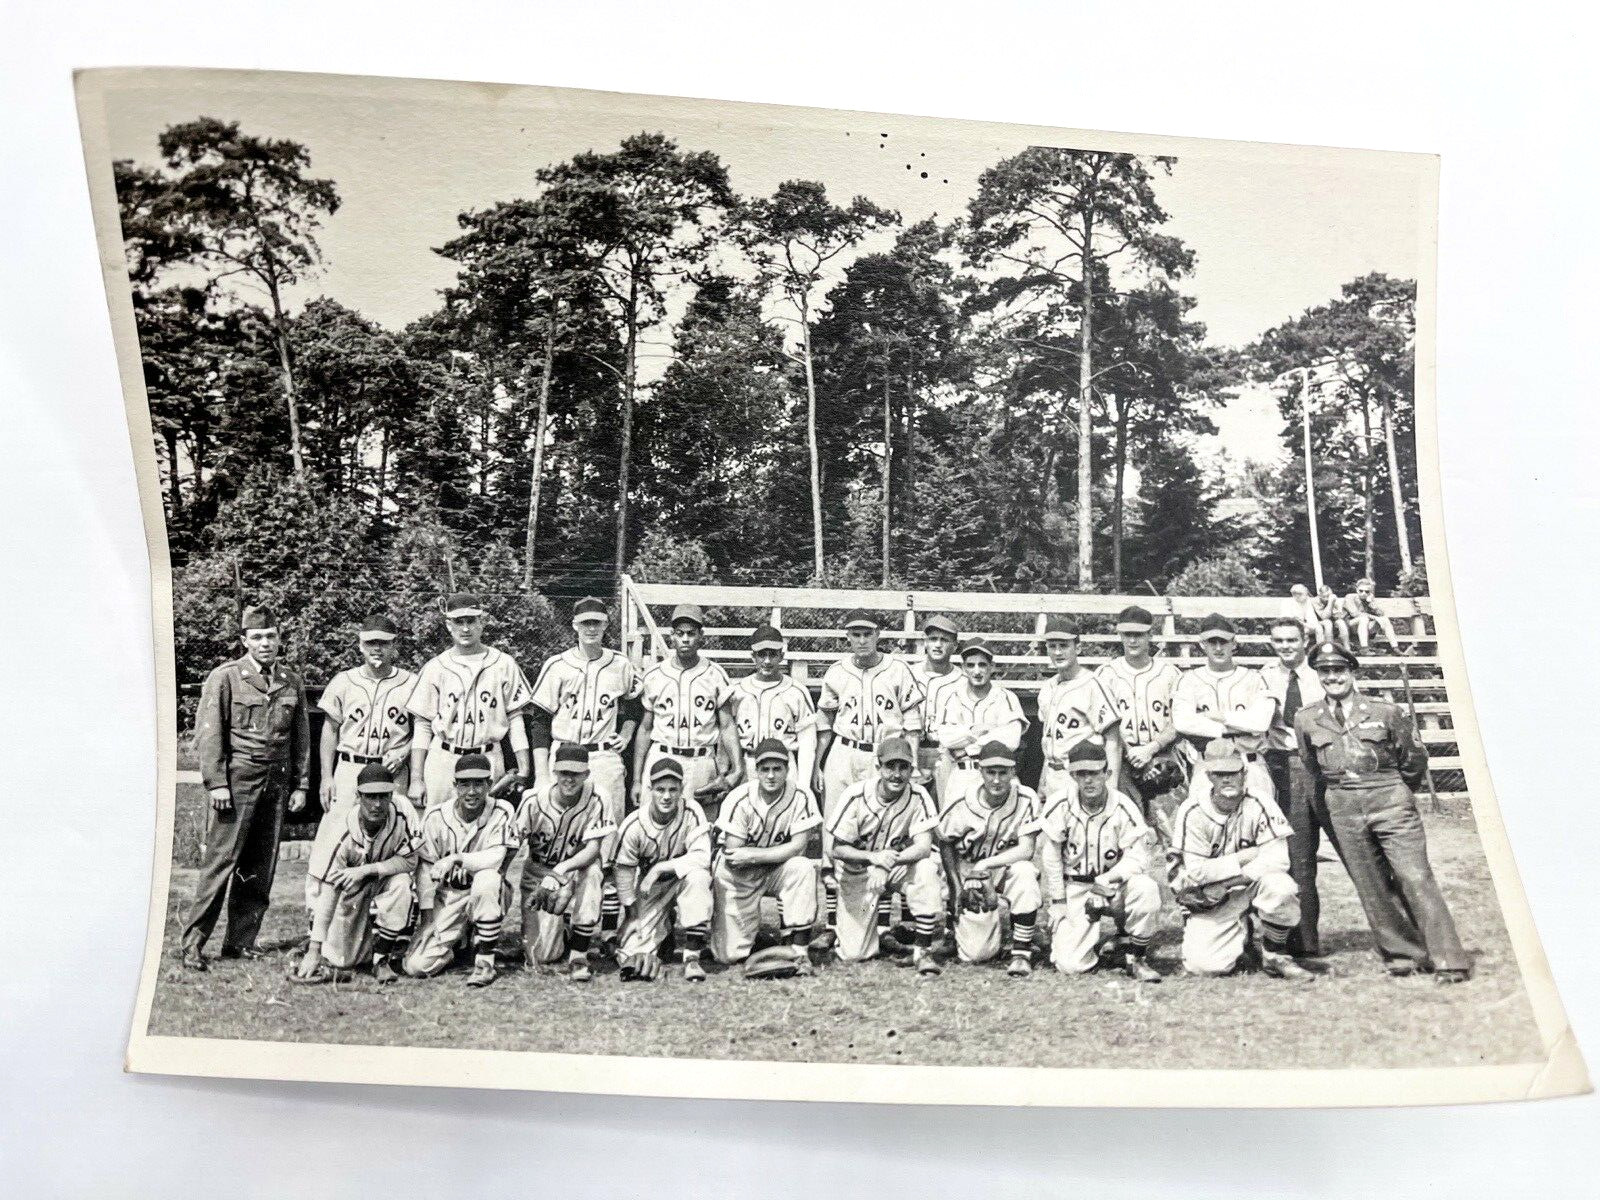 6 Unique Rare Pictures Of The Army 12 AAA Group Stationed In Germany After WWII.